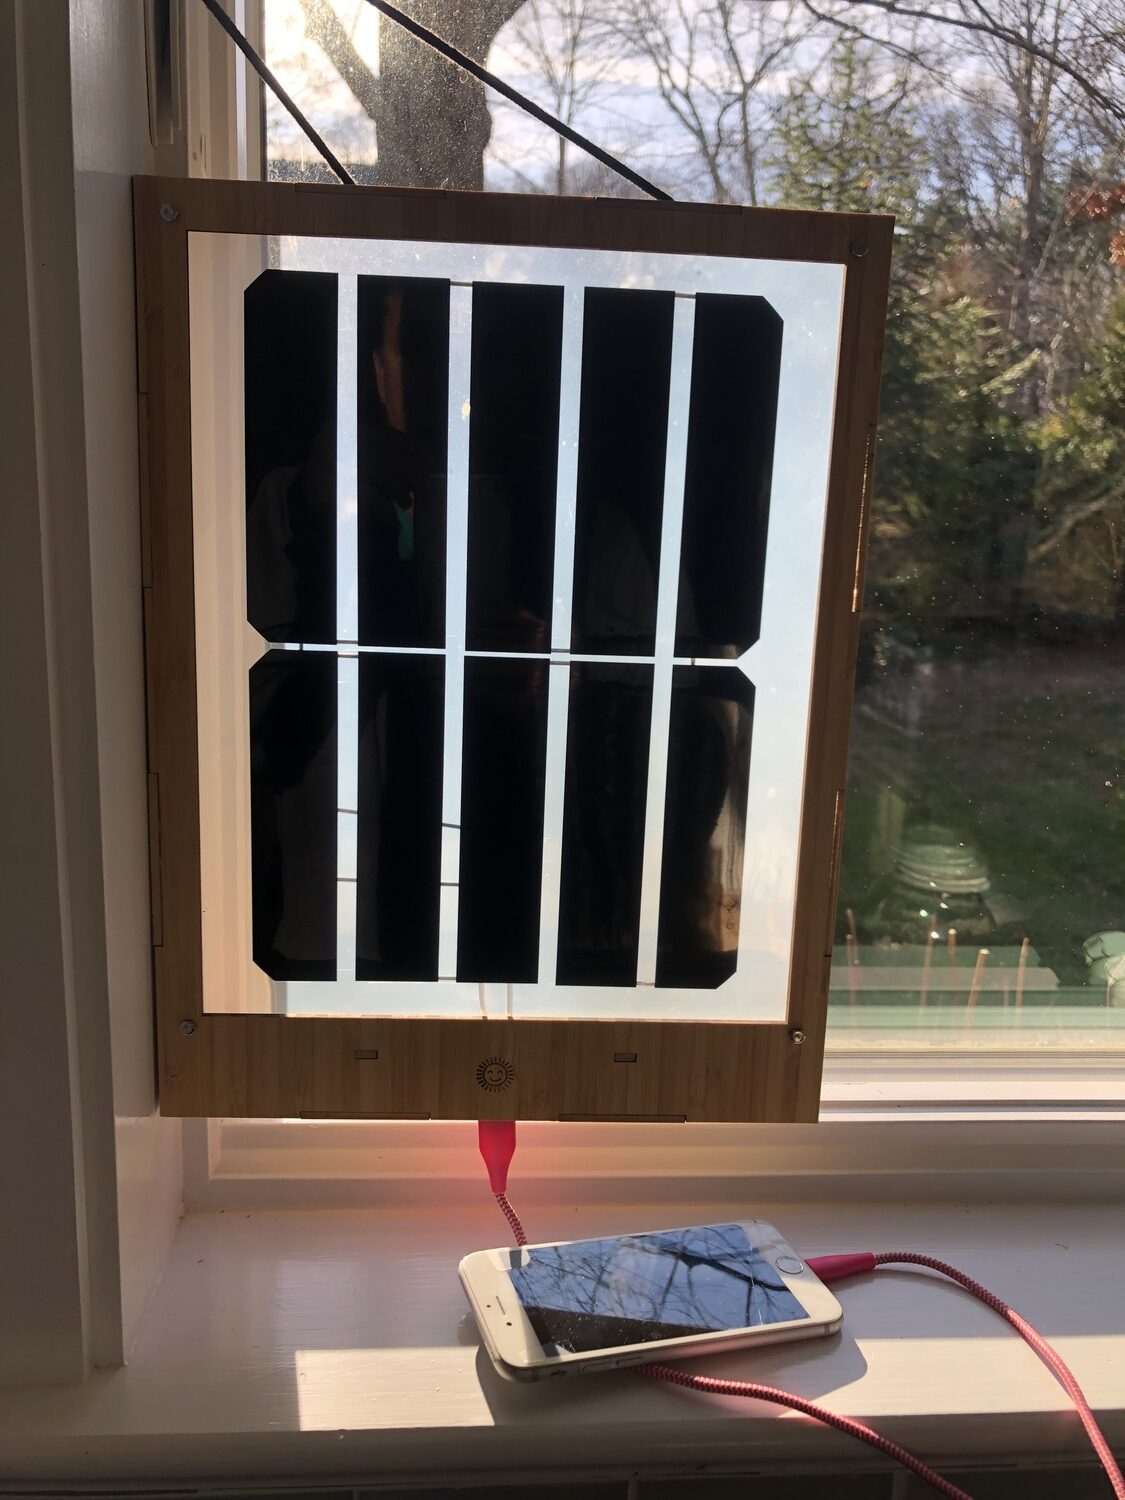 Portable window solar charger. Solar energy is safe, cheap, endlessly renewable and one of the most powerful ways to reduce greenhouse gas emissions. JENNY NOBLE